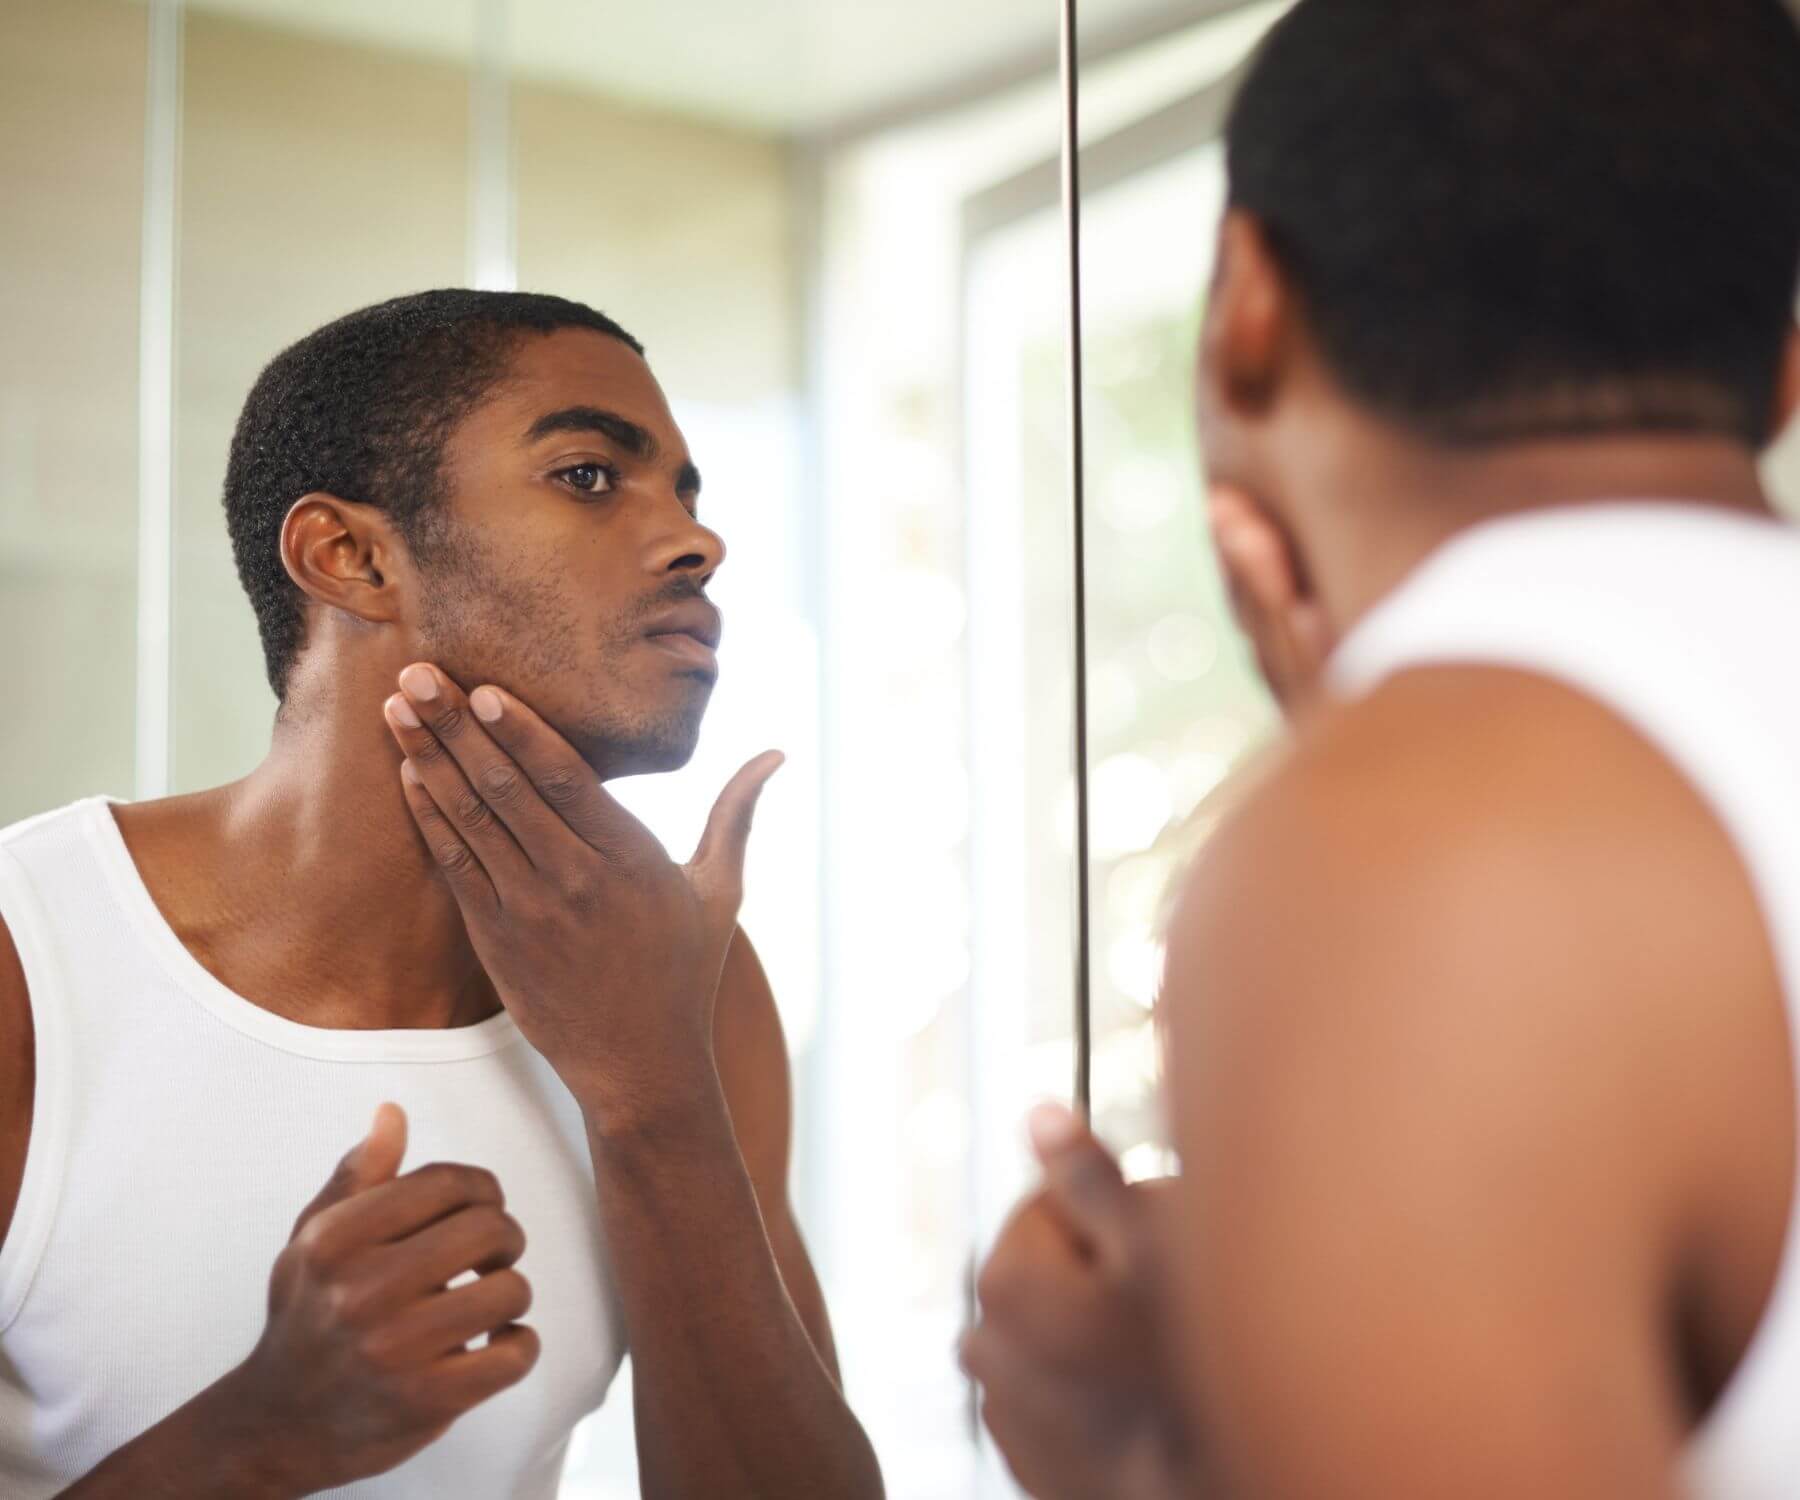 Wet Shave or Dry Shave: Which is Best for You?